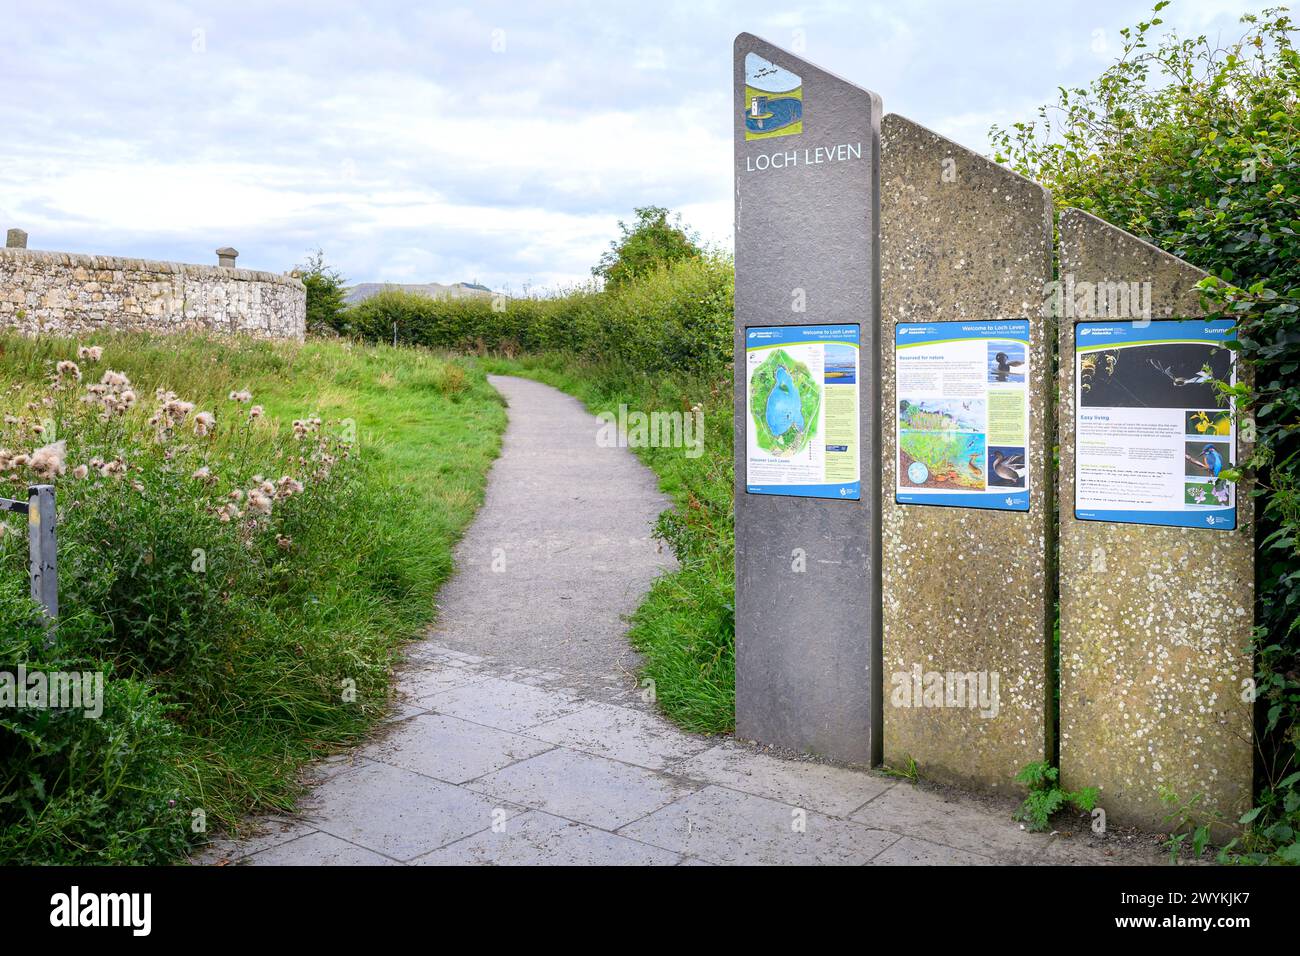 Paths for all, Loch Leven, Heritage Trail Stock Photo